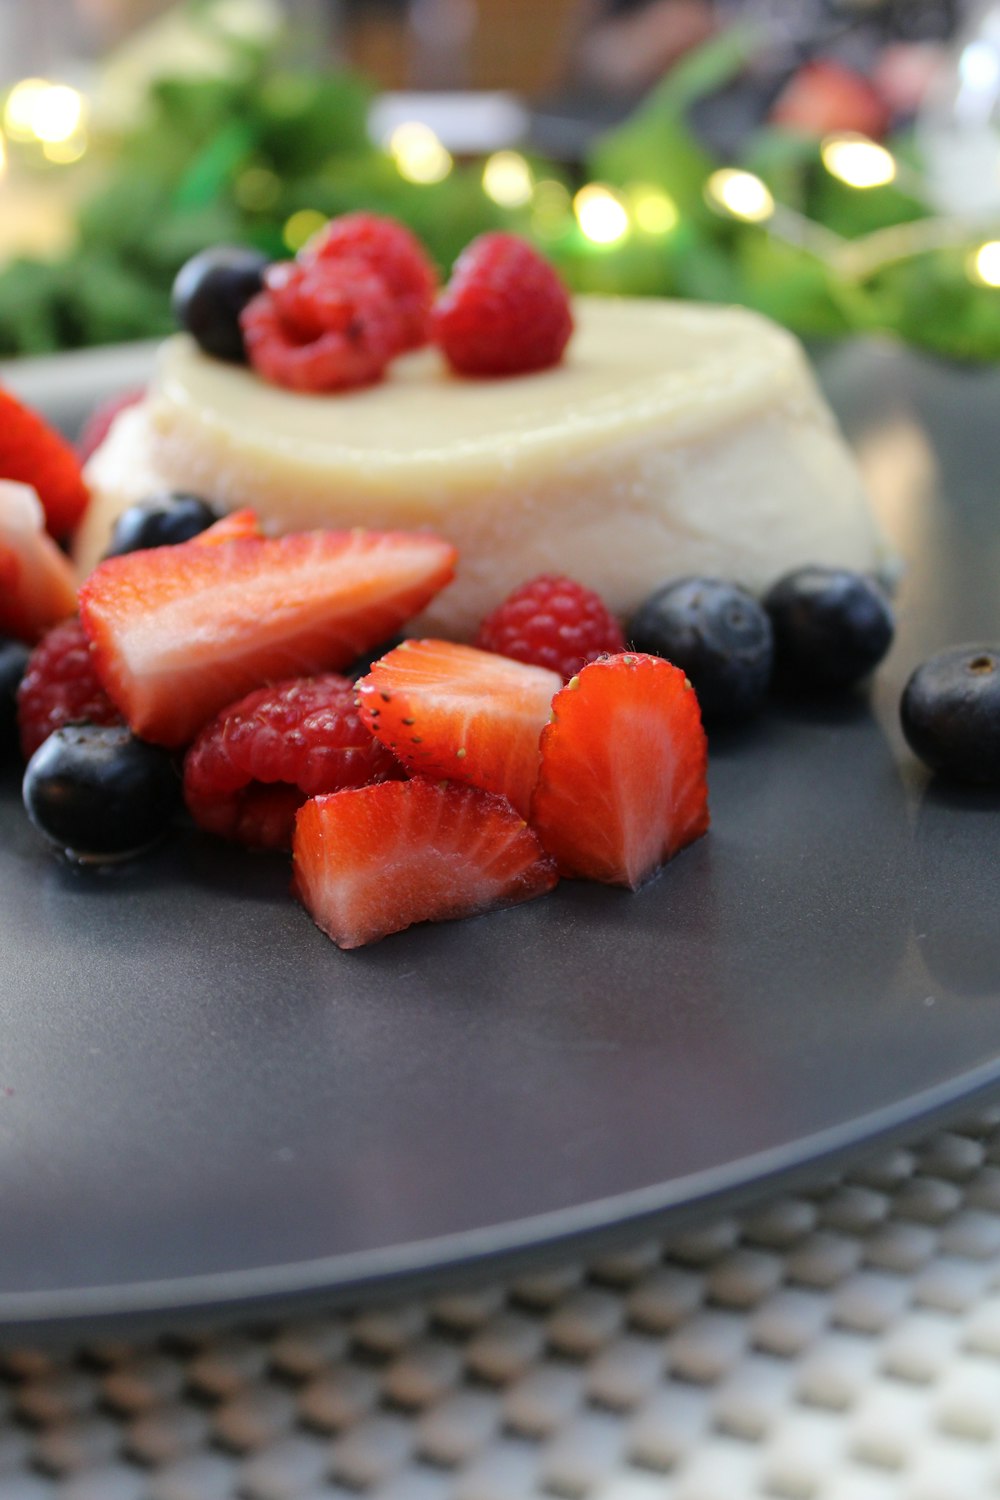 sliced strawberries and blueberries on black round plate